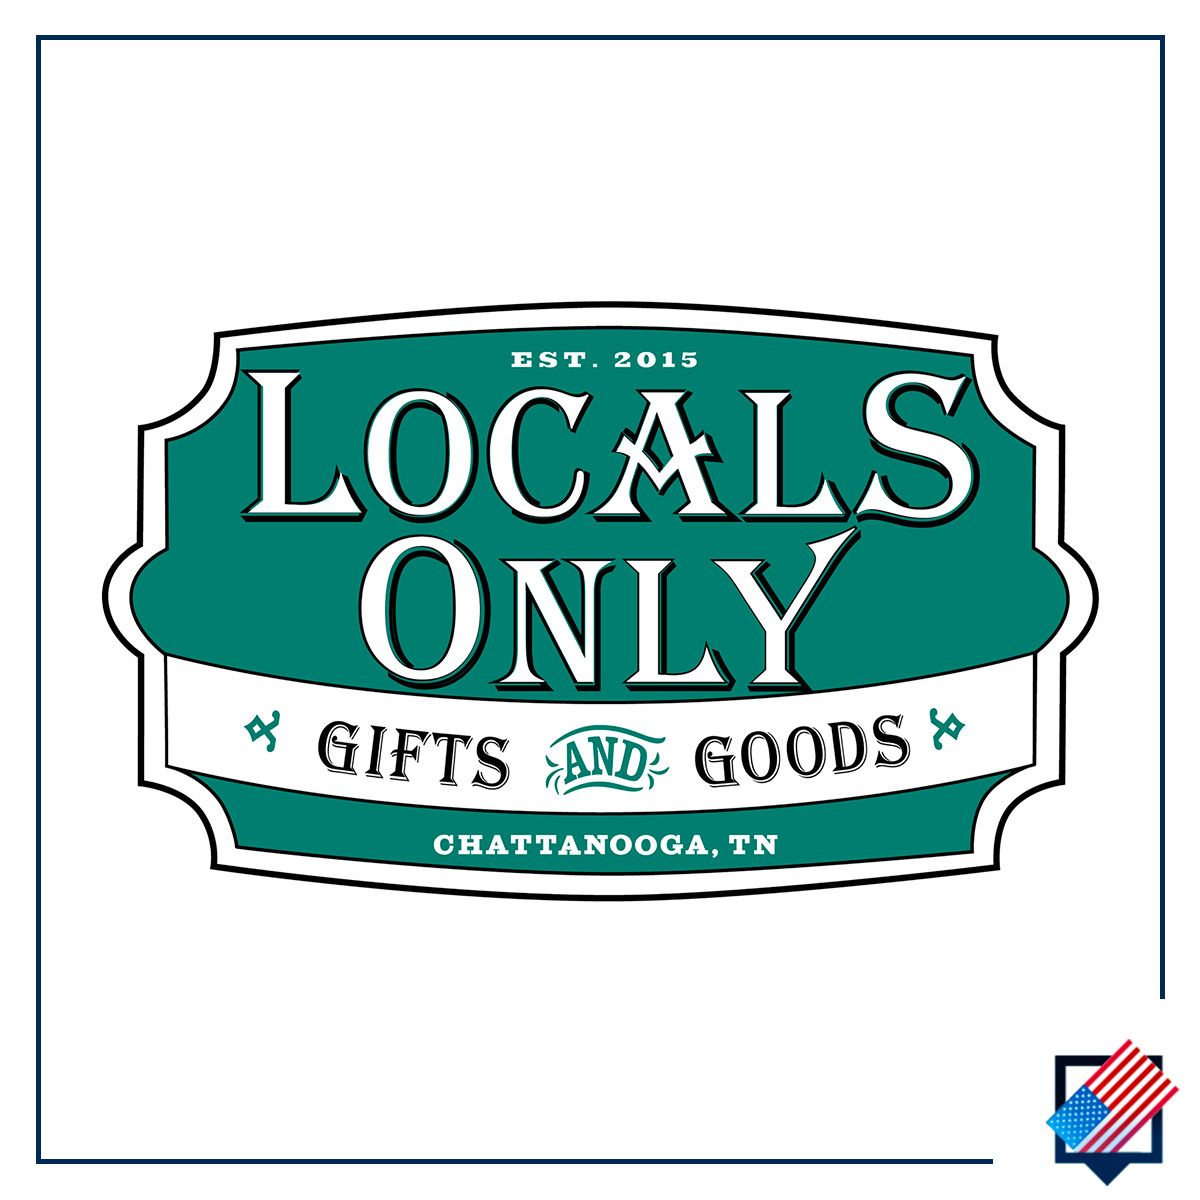 Locals Only Gifts and Goods